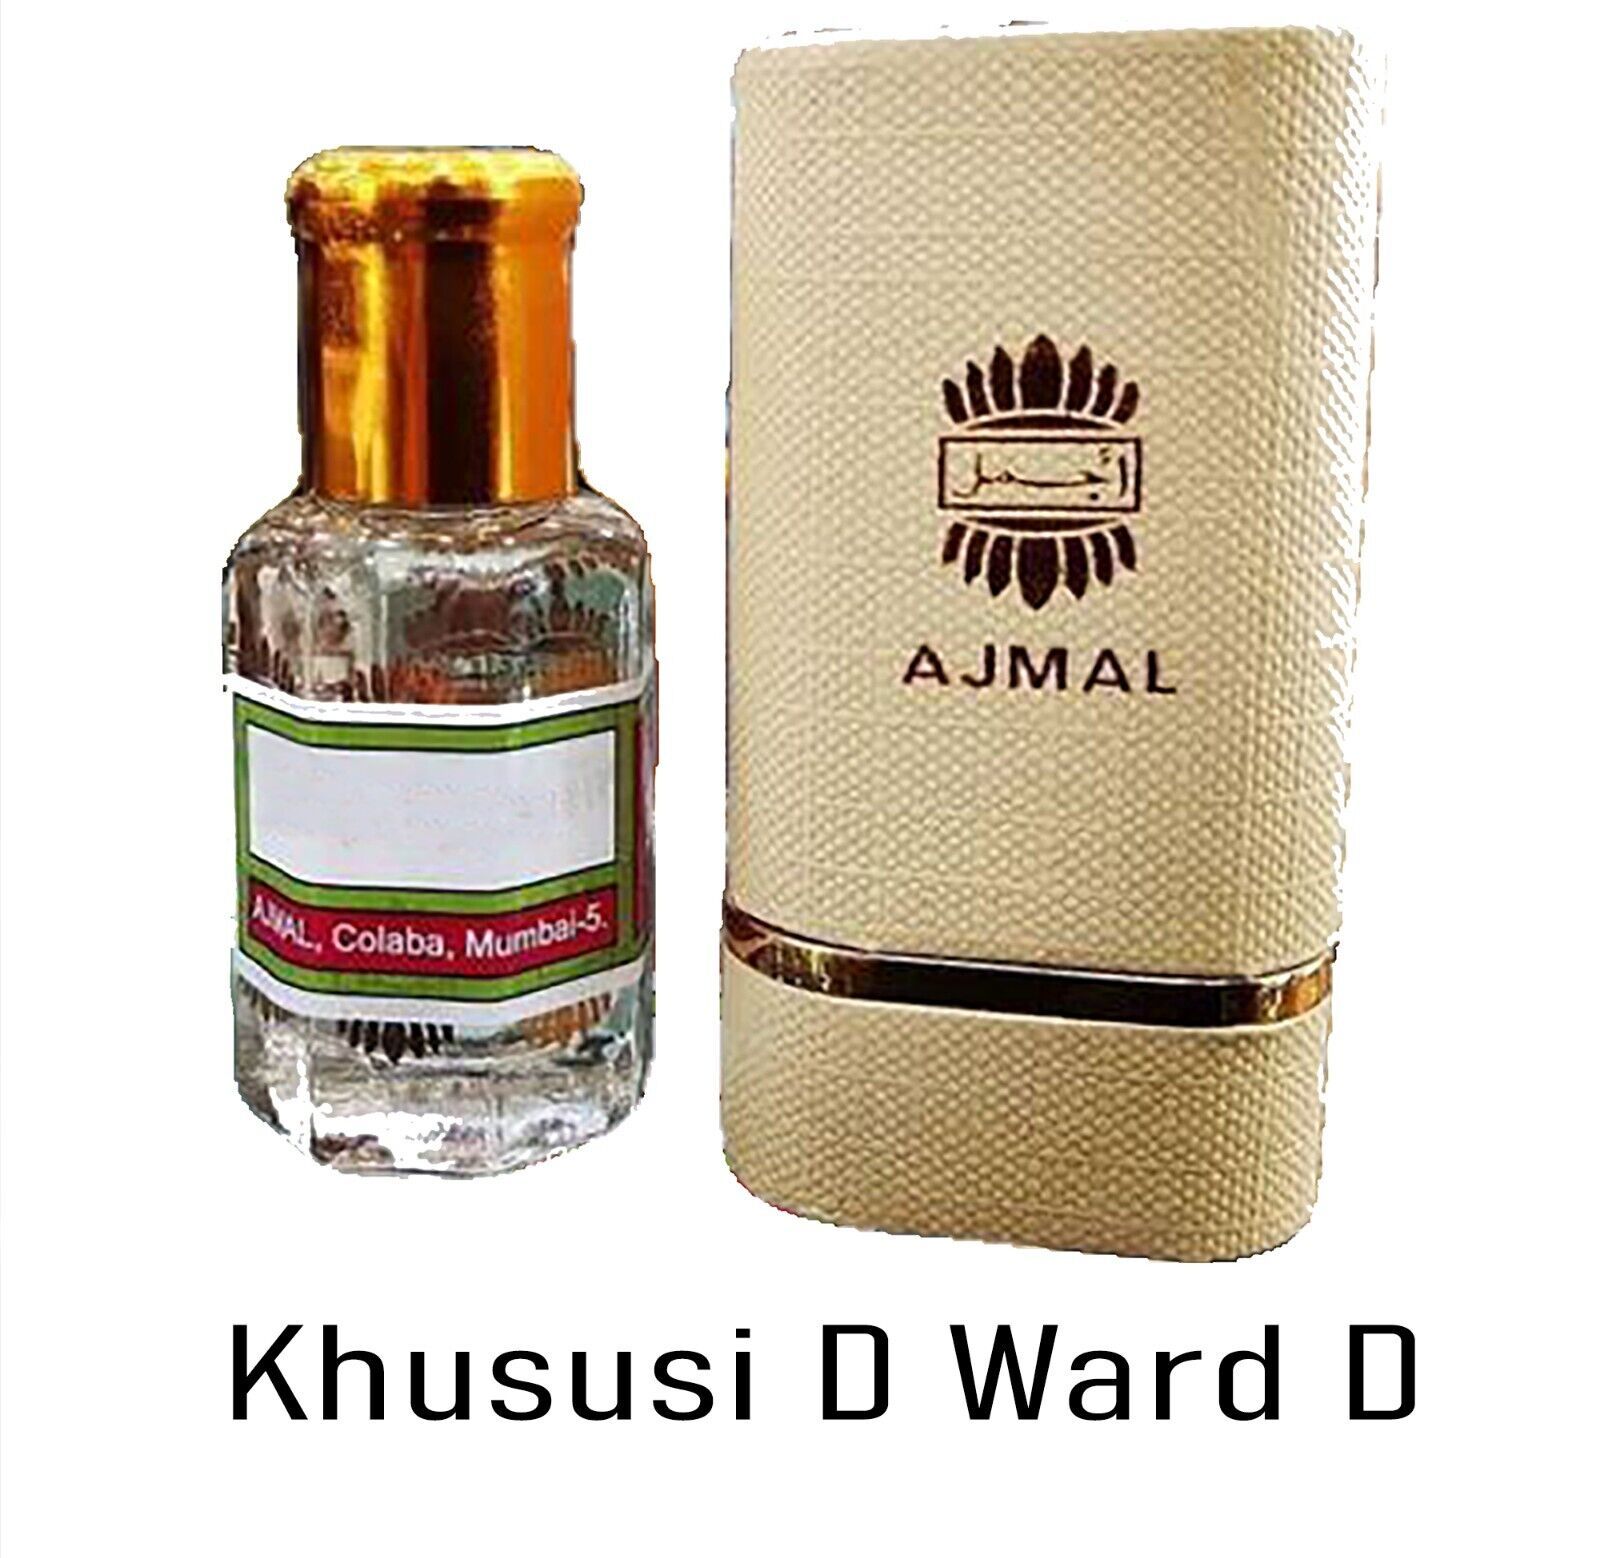 Primary image for Khususi D Ward D by Ajmal High Quality Fragrance Oil 12 ML Free Shipping